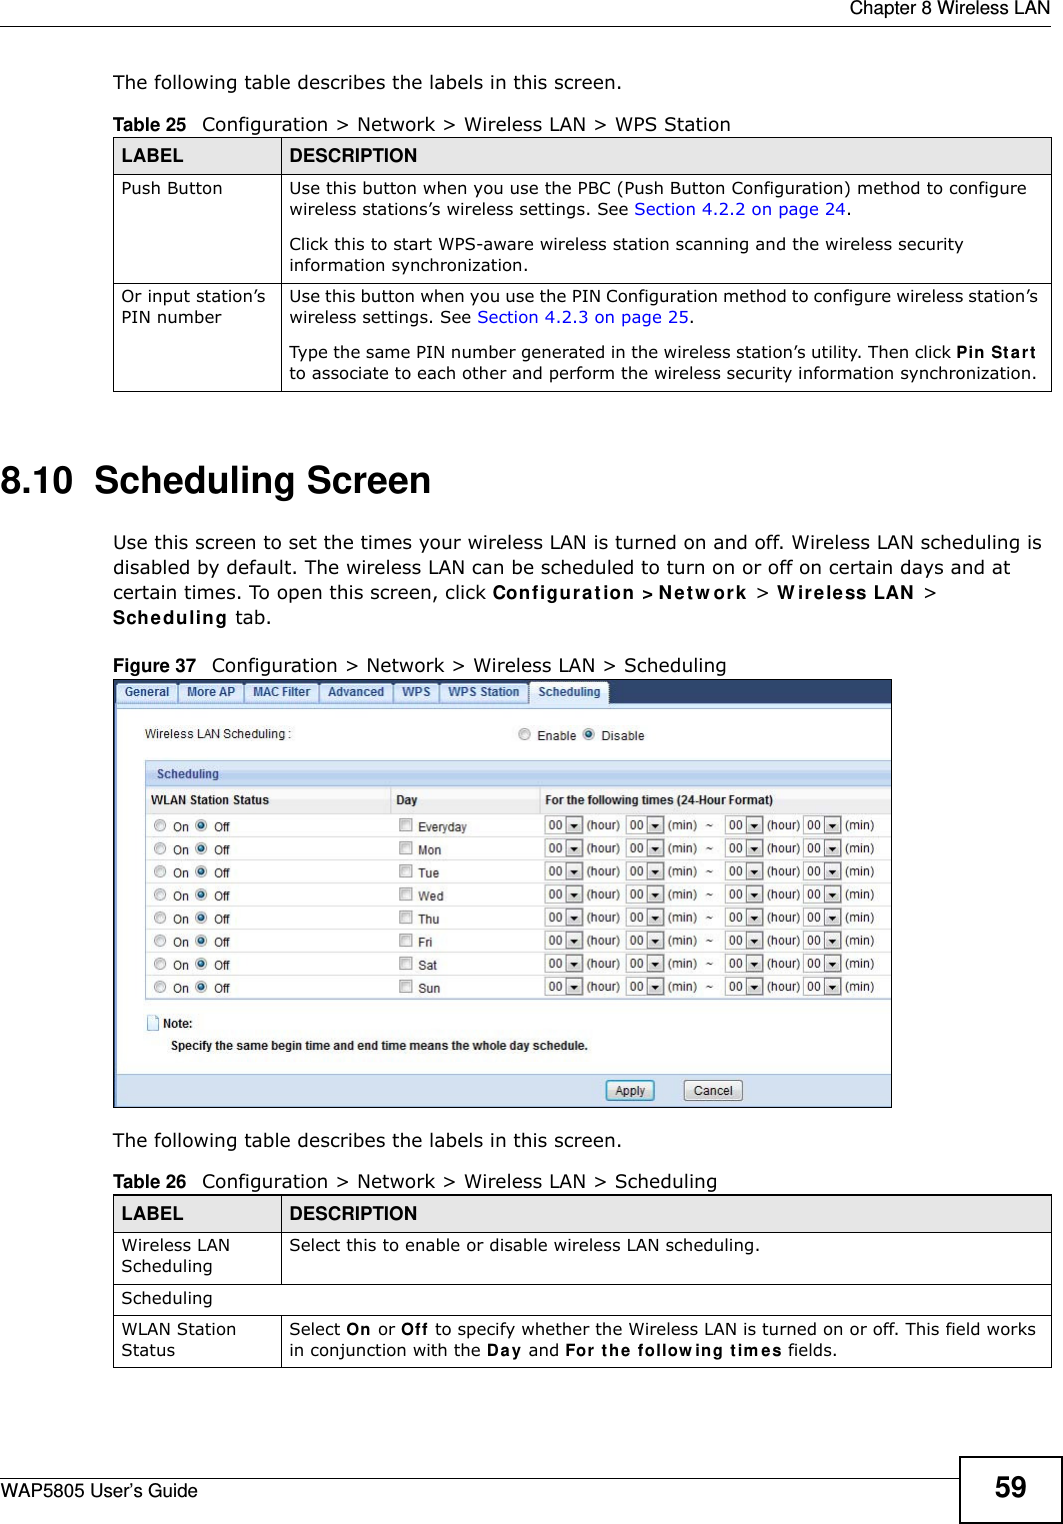  Chapter 8 Wireless LANWAP5805 User’s Guide 59The following table describes the labels in this screen.8.10  Scheduling Screen Use this screen to set the times your wireless LAN is turned on and off. Wireless LAN scheduling is disabled by default. The wireless LAN can be scheduled to turn on or off on certain days and at certain times. To open this screen, click Configuration &gt;Network &gt; Wireless LAN &gt; Scheduling tab.Figure 37   Configuration &gt; Network &gt; Wireless LAN &gt; SchedulingThe following table describes the labels in this screen.Table 25   Configuration &gt; Network &gt; Wireless LAN &gt; WPS StationLABEL DESCRIPTIONPush Button Use this button when you use the PBC (Push Button Configuration) method to configure wireless stations’s wireless settings. See Section 4.2.2 on page 24.Click this to start WPS-aware wireless station scanning and the wireless security information synchronization. Or input station’s PIN numberUse this button when you use the PIN Configuration method to configure wireless station’s wireless settings. See Section 4.2.3 on page 25.Type the same PIN number generated in the wireless station’s utility. Then click Pin Start to associate to each other and perform the wireless security information synchronization. Table 26   Configuration &gt; Network &gt; Wireless LAN &gt; SchedulingLABEL DESCRIPTIONWireless LAN SchedulingSelect this to enable or disable wireless LAN scheduling.SchedulingWLAN Station StatusSelect On or Off to specify whether the Wireless LAN is turned on or off. This field works in conjunction with the Day and For the following times fields.